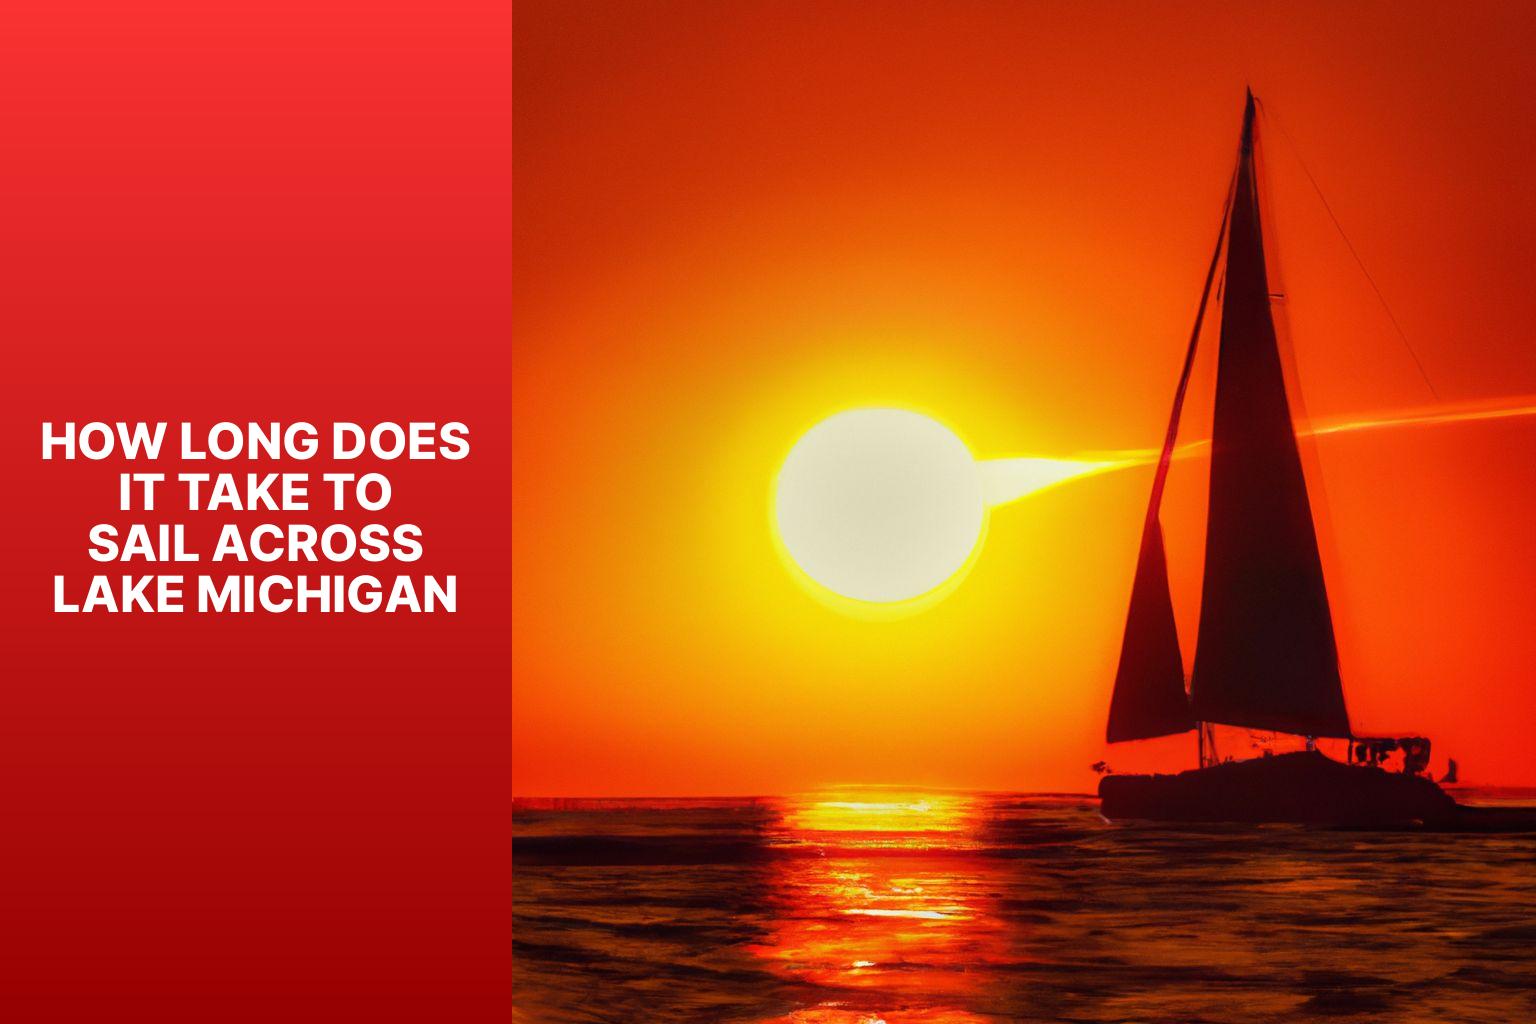 Sail Across Lake Michigan: Discover the Time it Takes for an Unforgettable Journey